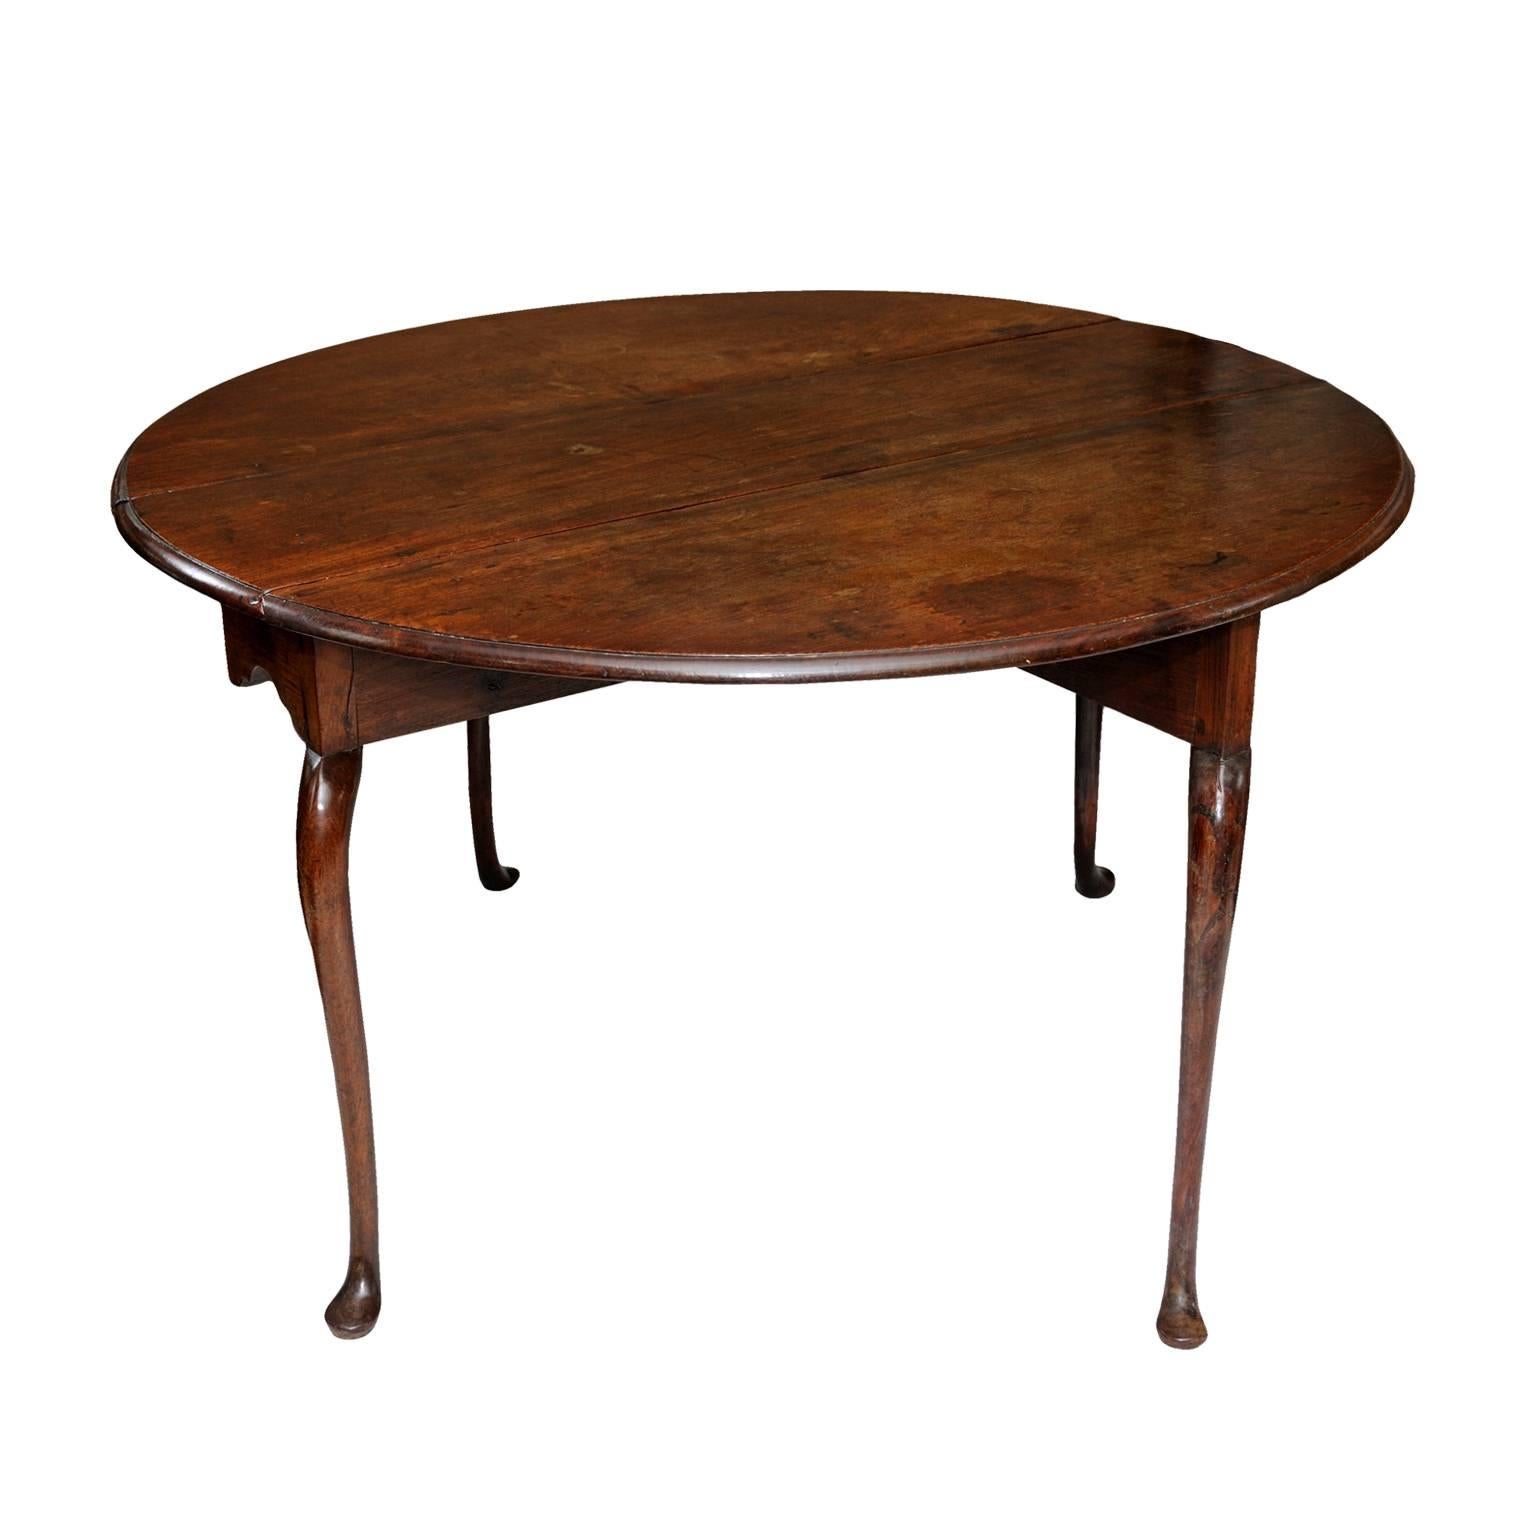 This is a beautiful and rare 18th century Anglo Dutch East Indies Padauk wood drop leaf table. This well proportioned table folds down to a very useful and slim size, circa 1760.